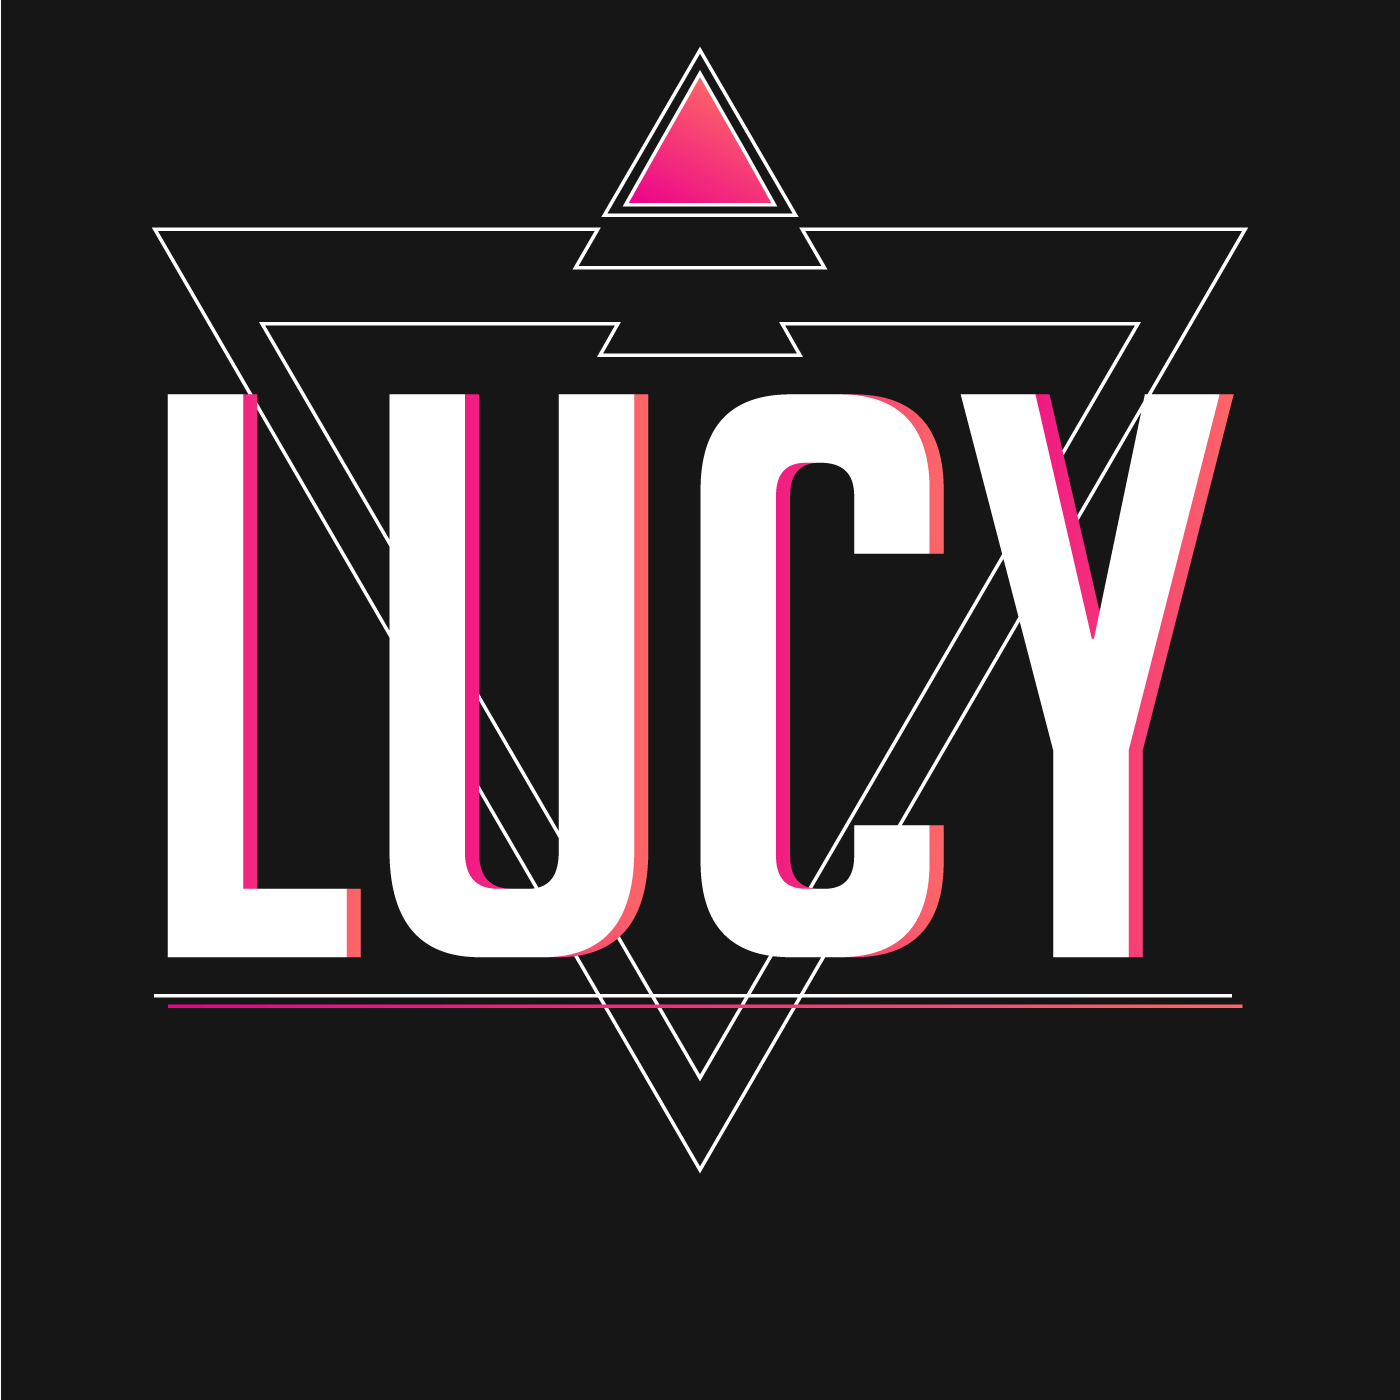 Lucy Logo - Fancy Logo I made for my steam account inspired by Lucy herself : LSD